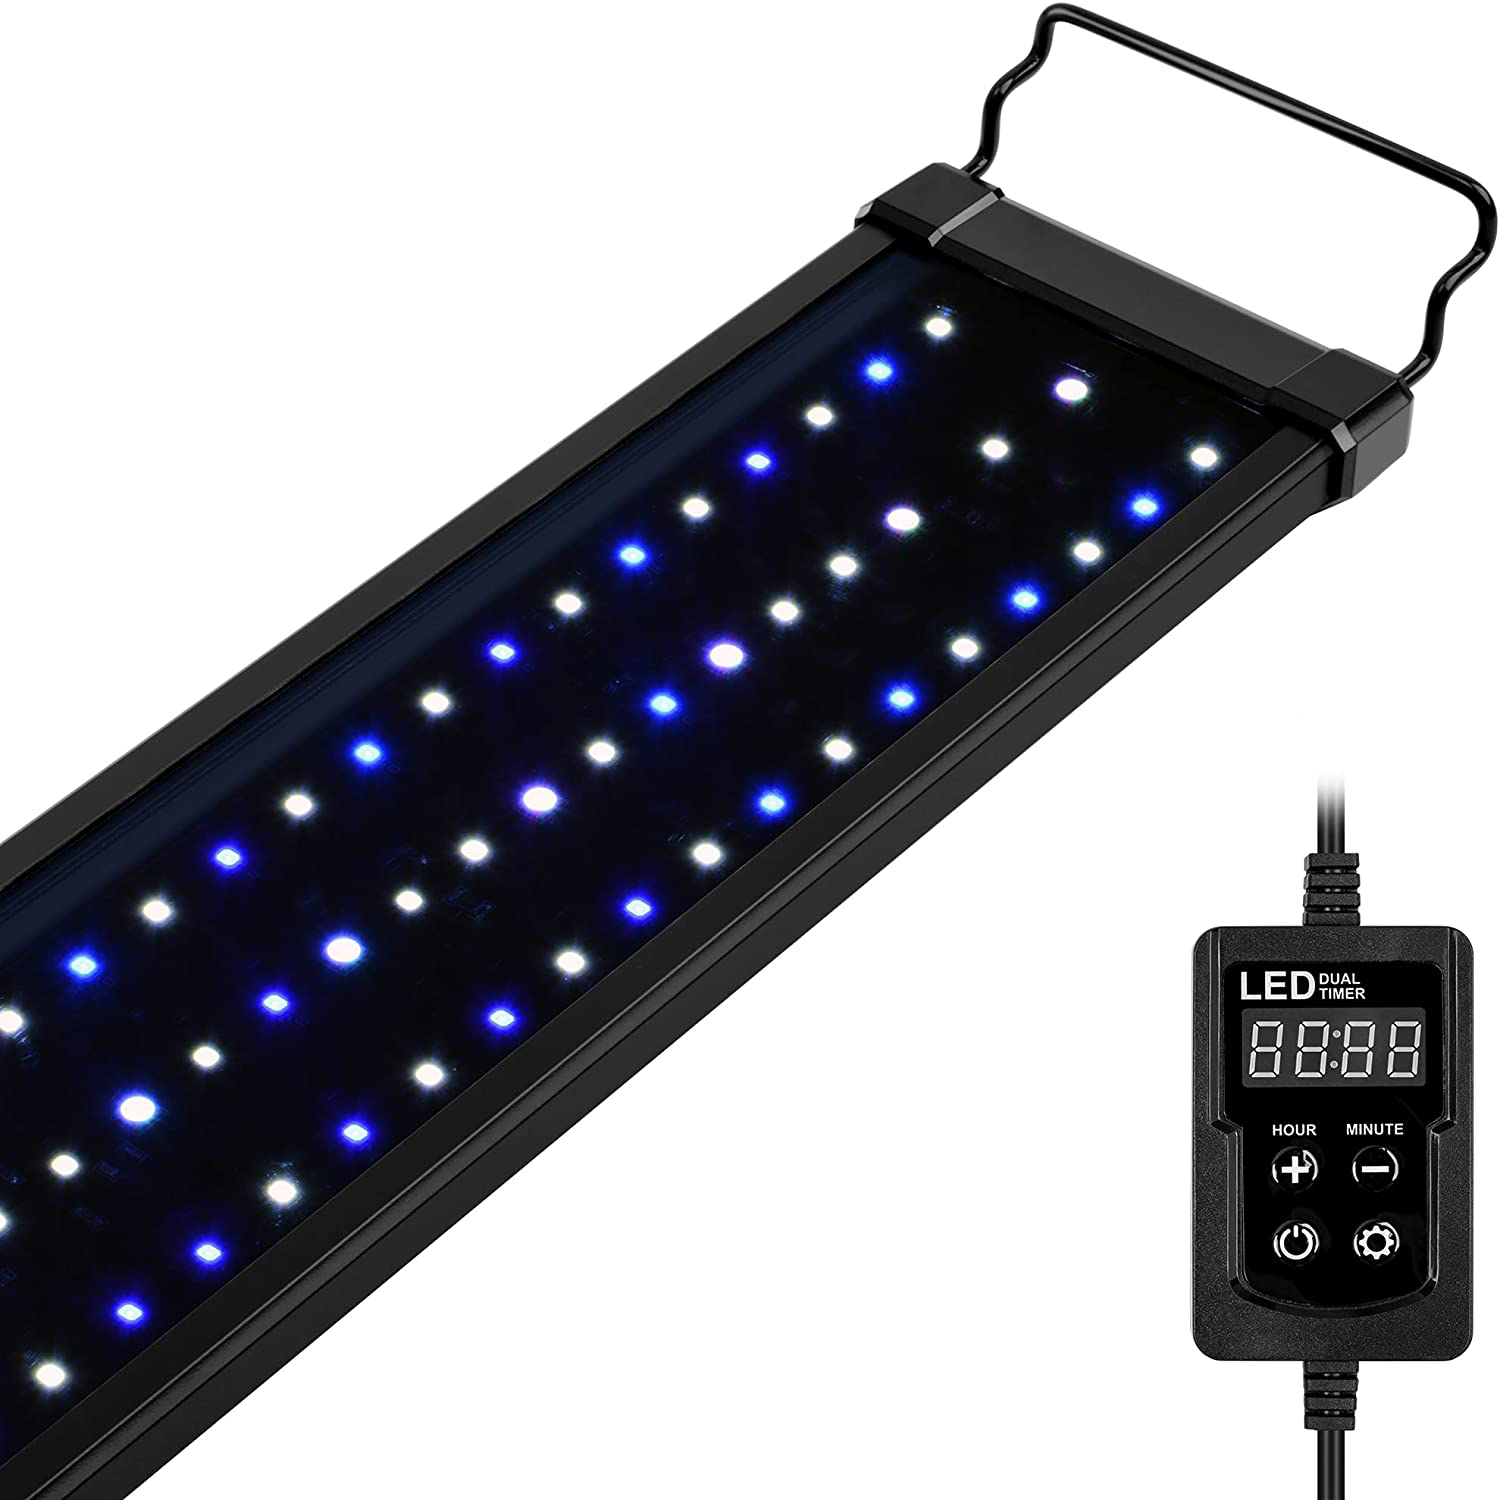 NICREW Saltwater Aquarium Light, Marine LED Fish Tank Light for Coral Reef Tanks, 2-Channel Timer Included